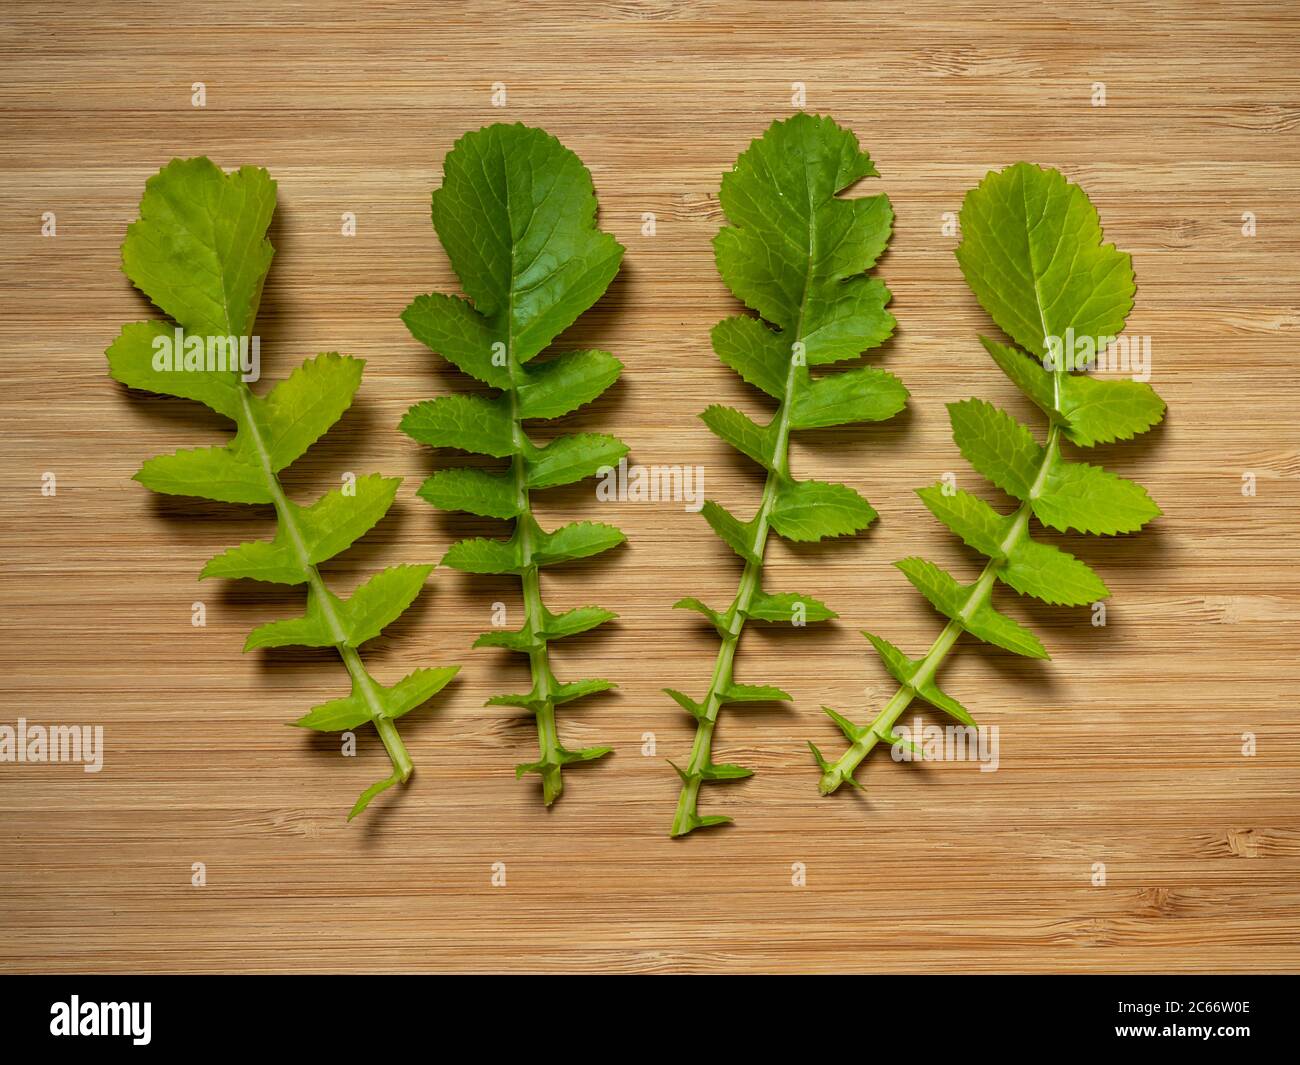 Green leaves of leaf radish Saisai laid on a wooden chopping board Stock Photo